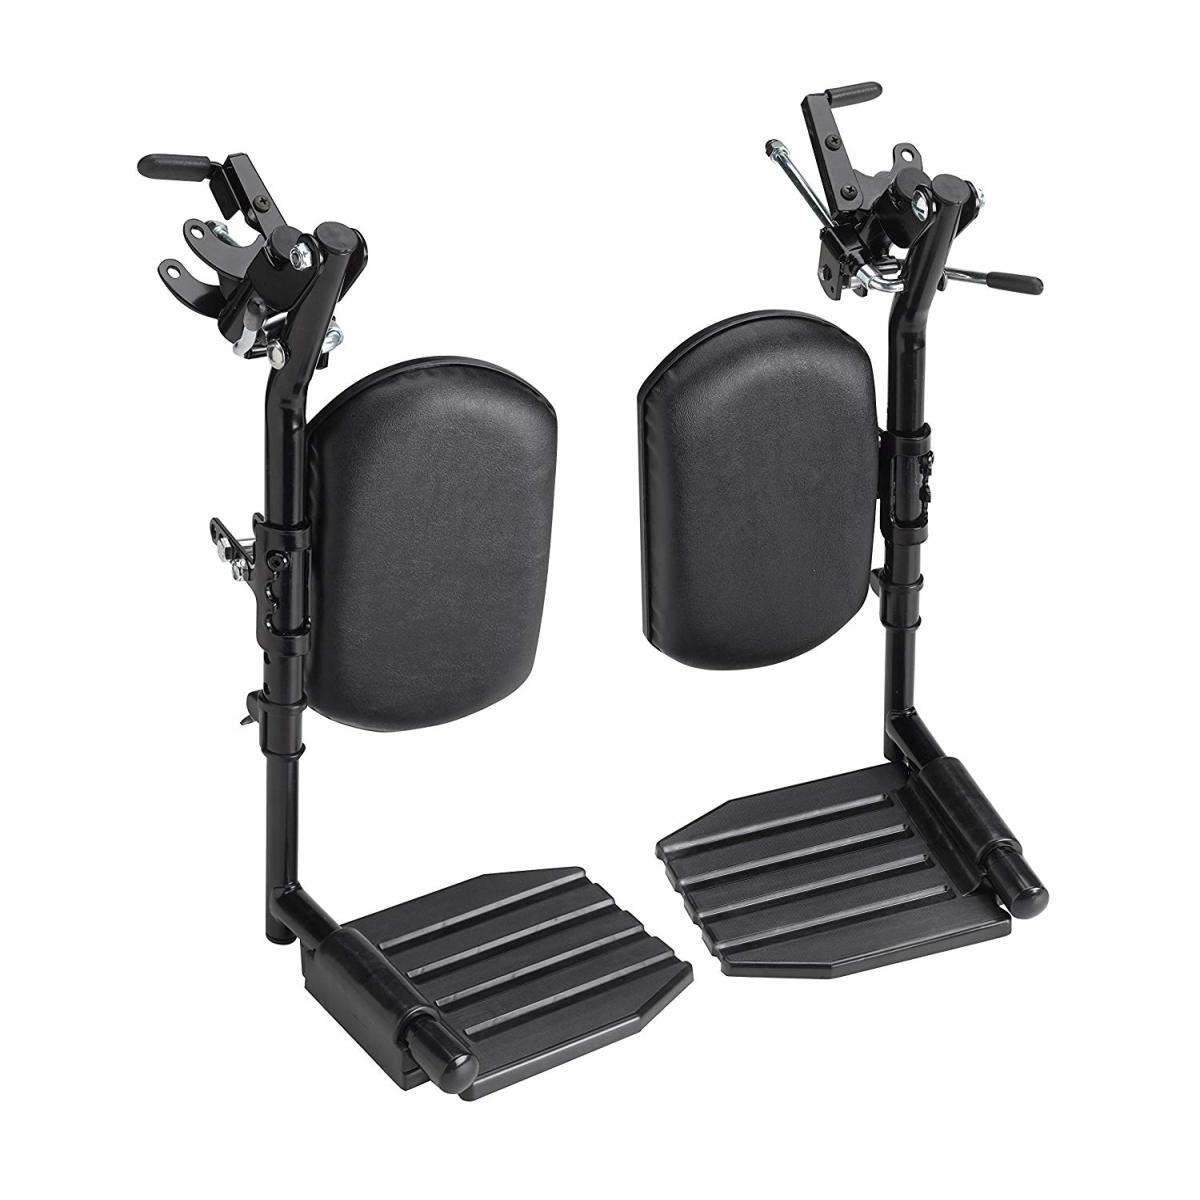 Invacare Swing-Away Elevating Legrests, Composite Footplates, Padded Calf Pads